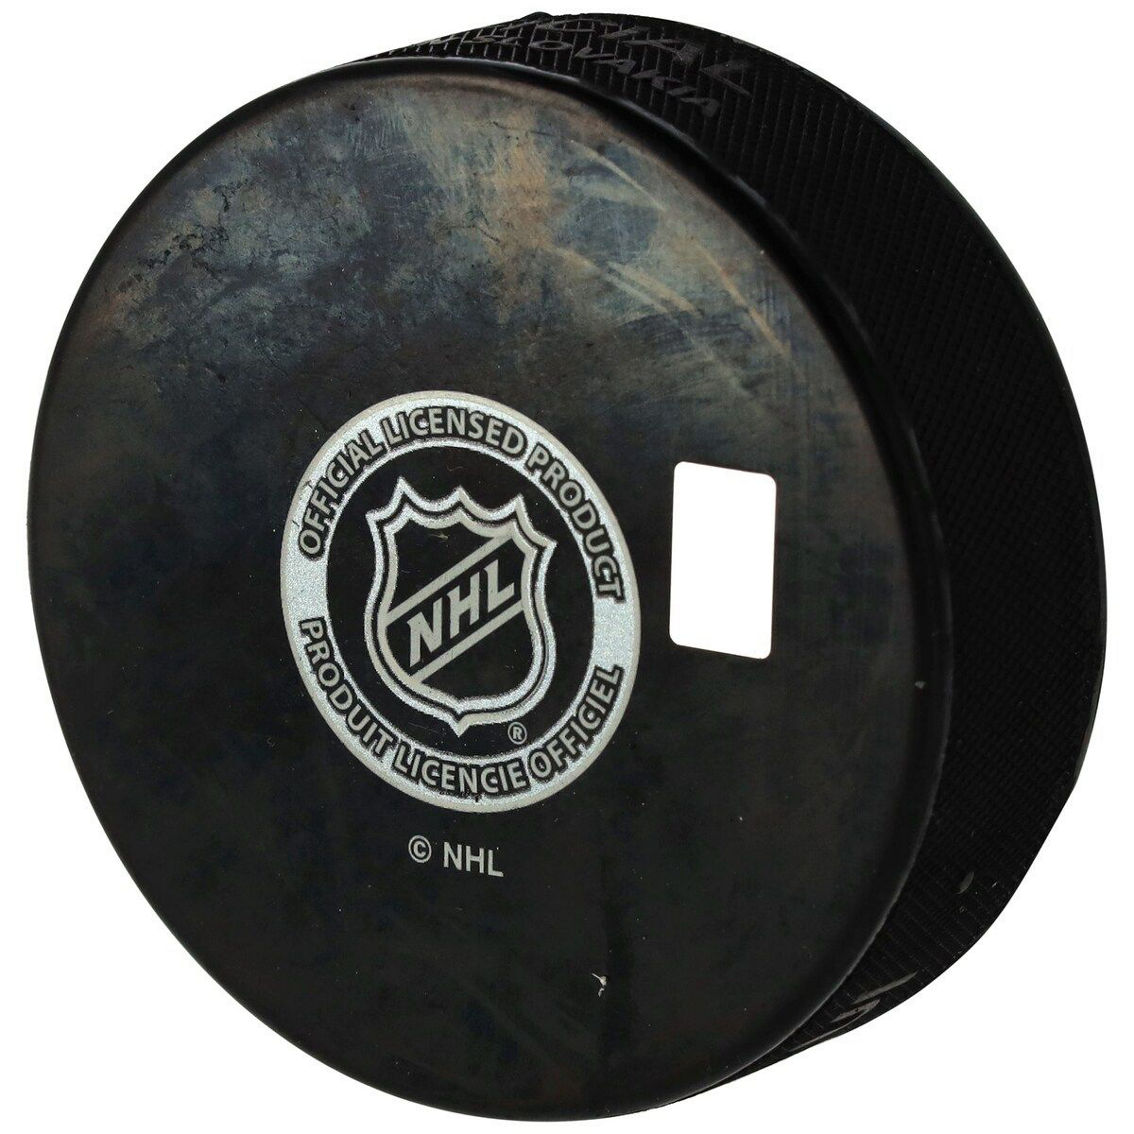 Fanatics Authentic Spencer Knight Florida Panthers Autographed Hockey Puck - Image 3 of 3